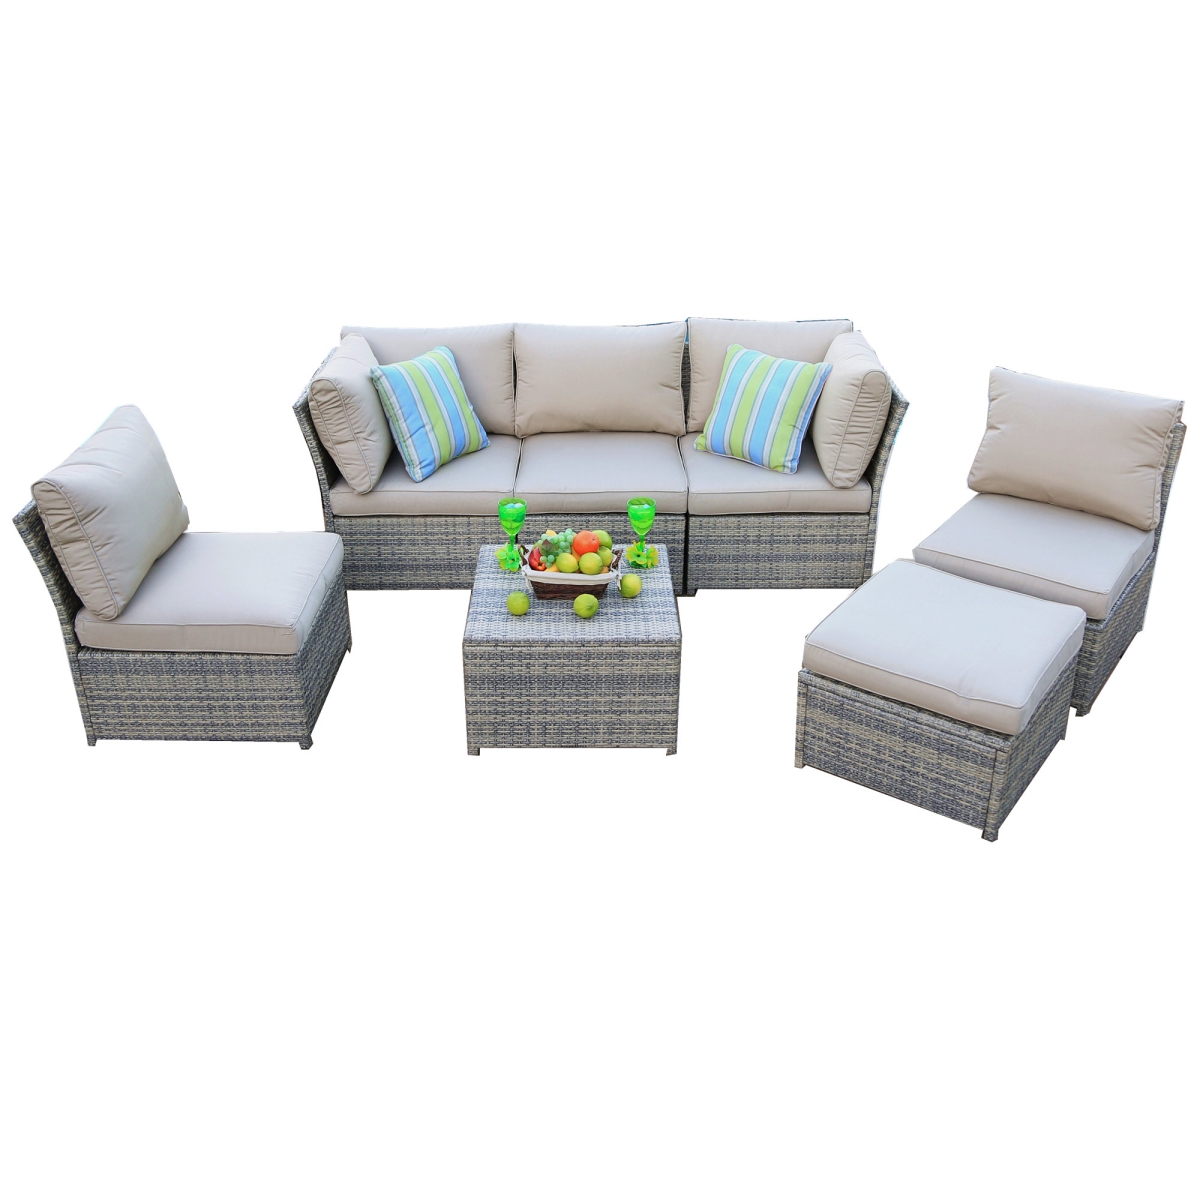 Apple Valley Sectional Set - 7 Piece